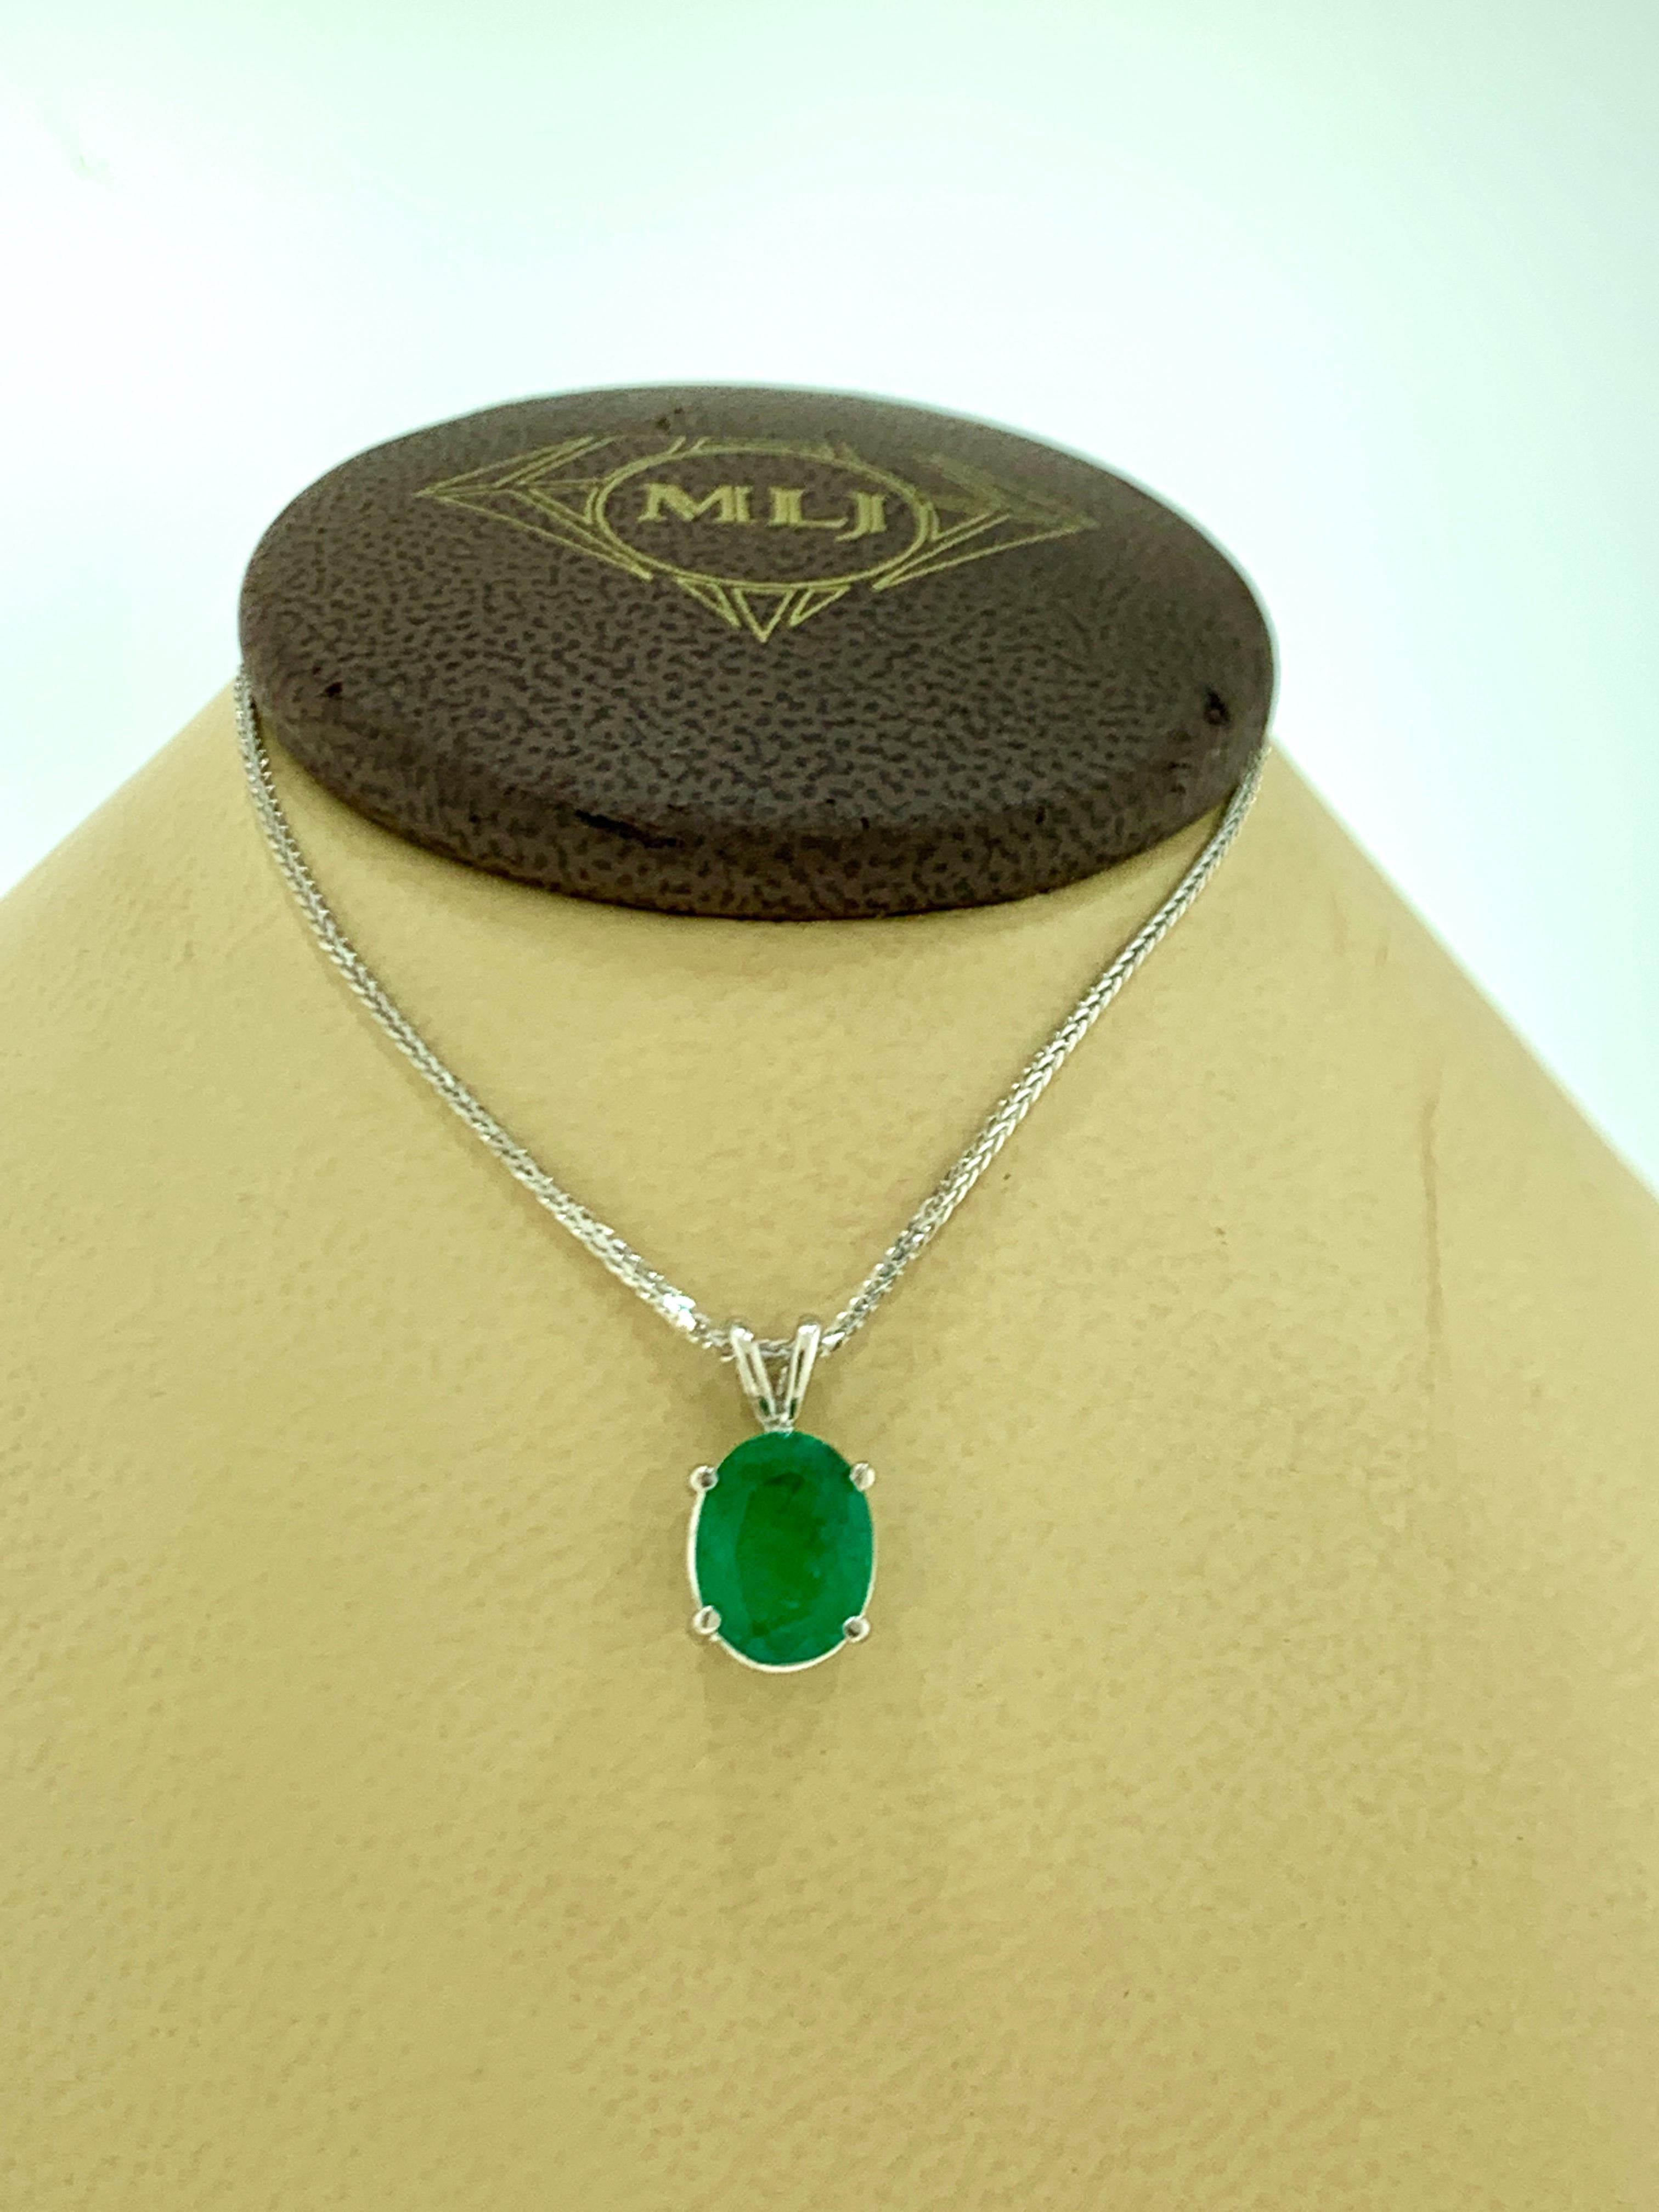 Women's 2.5 Carat Oval Shape Emerald Pendant or Necklace 14 Karat White Gold with Chain